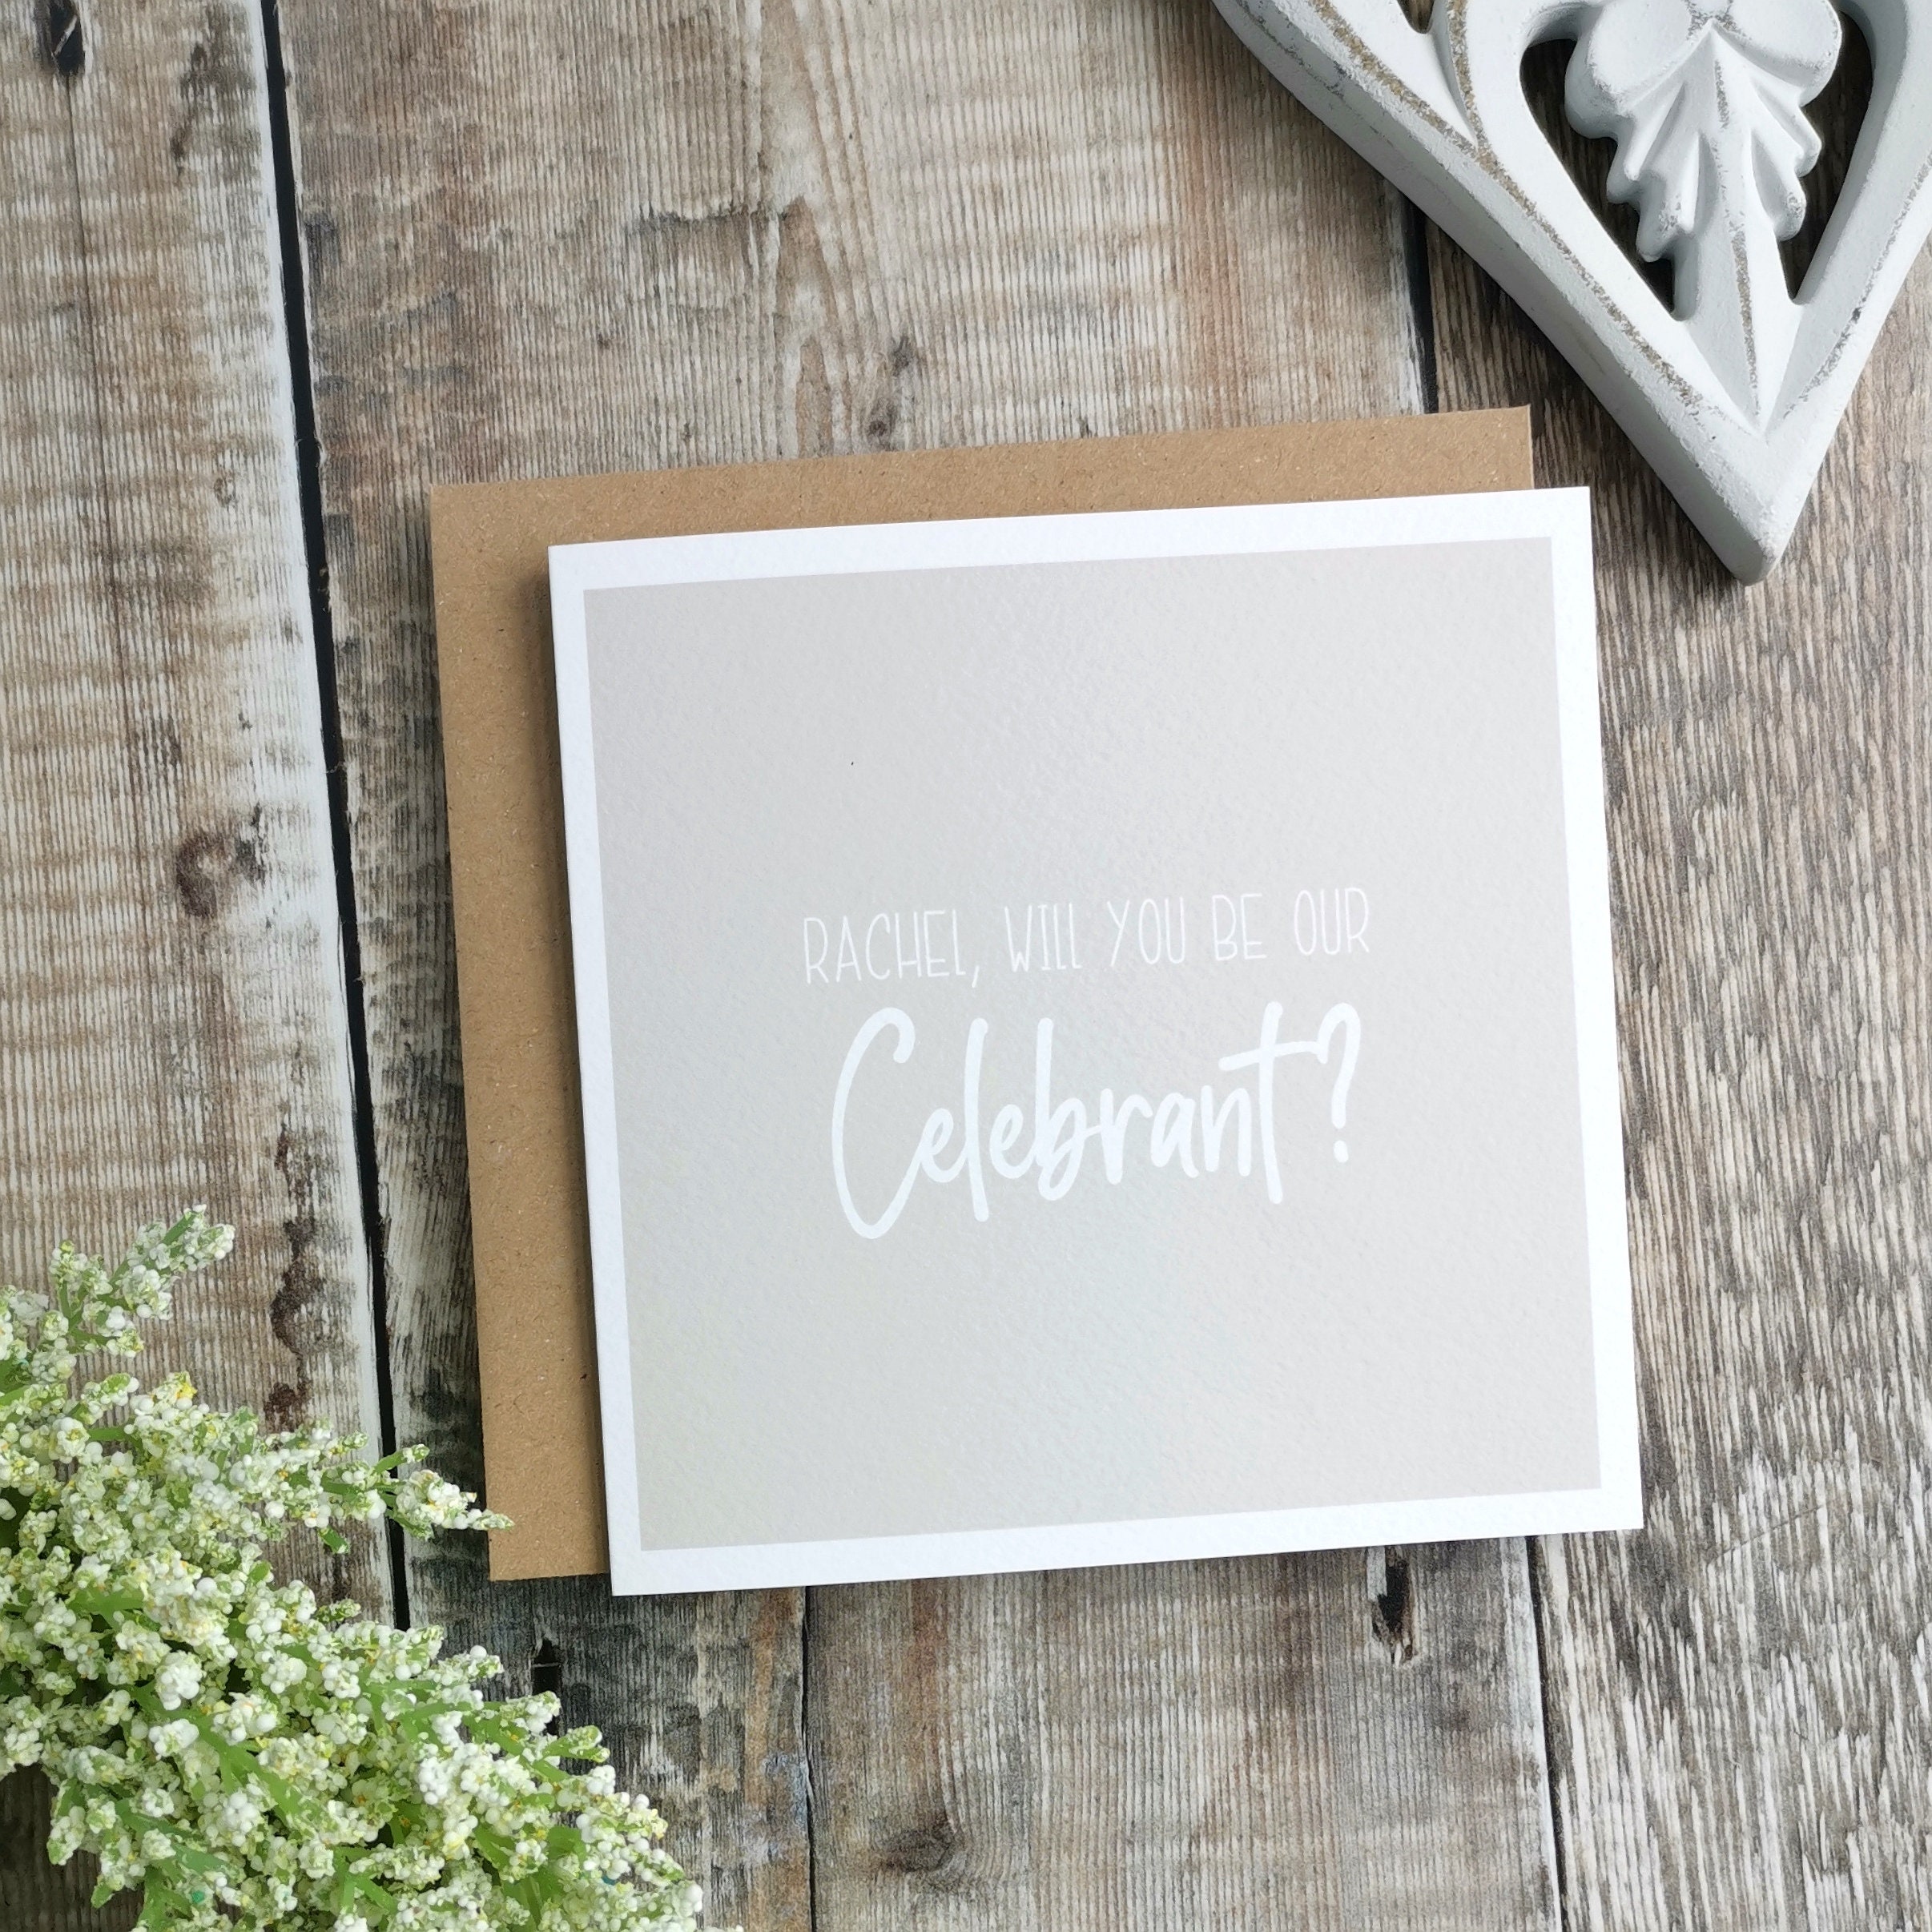 Personalised Will You Be Our Celebrant Or Master Of Ceremonies? Wedding Card. Beige-Grey, Neutral, Modern, Natural, Minimalist Wedding Card